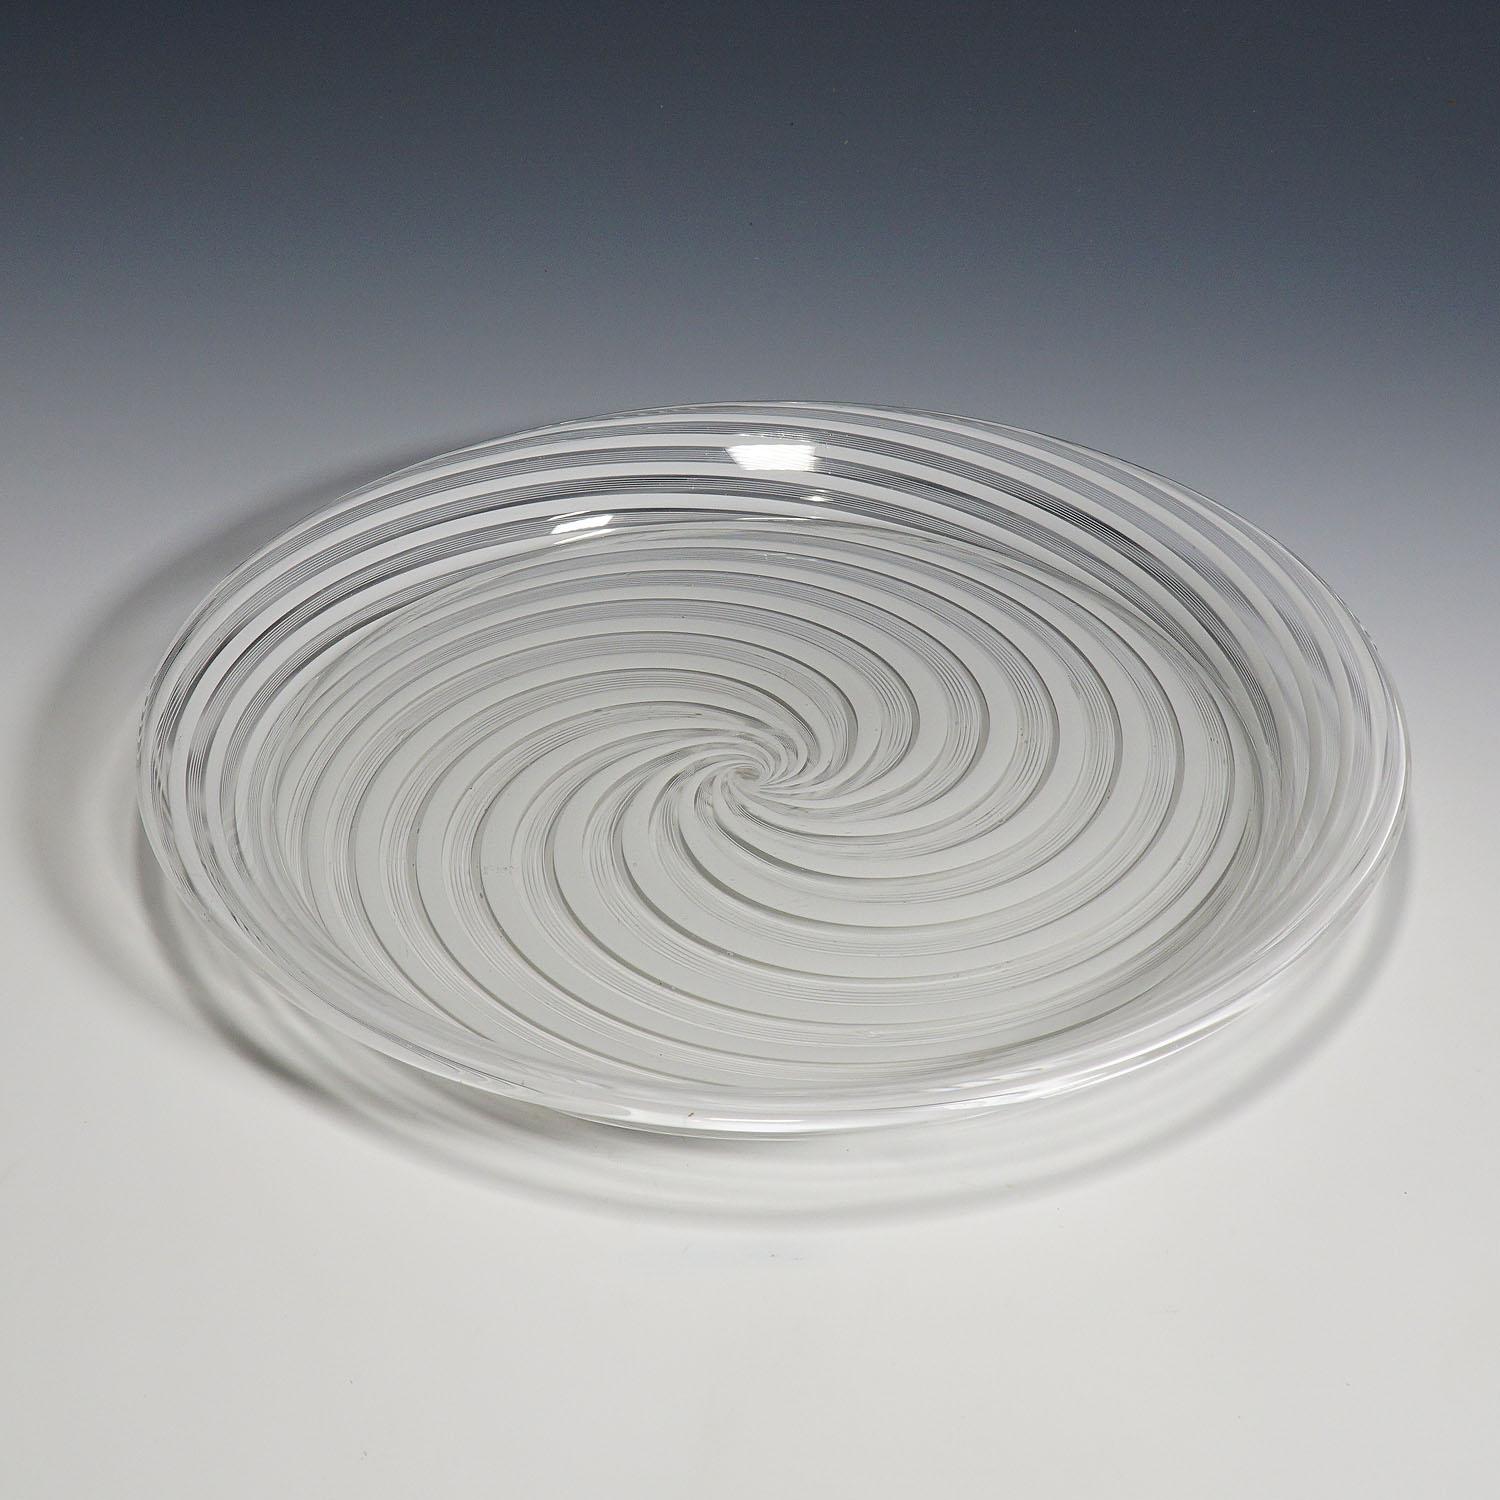 A large art glass plate made of clear glass with white filigrana bands. Attributed to Societa Anonima for Azioni Salviati & C., Murano second half of the 19th century.

Measures: height: 1.18